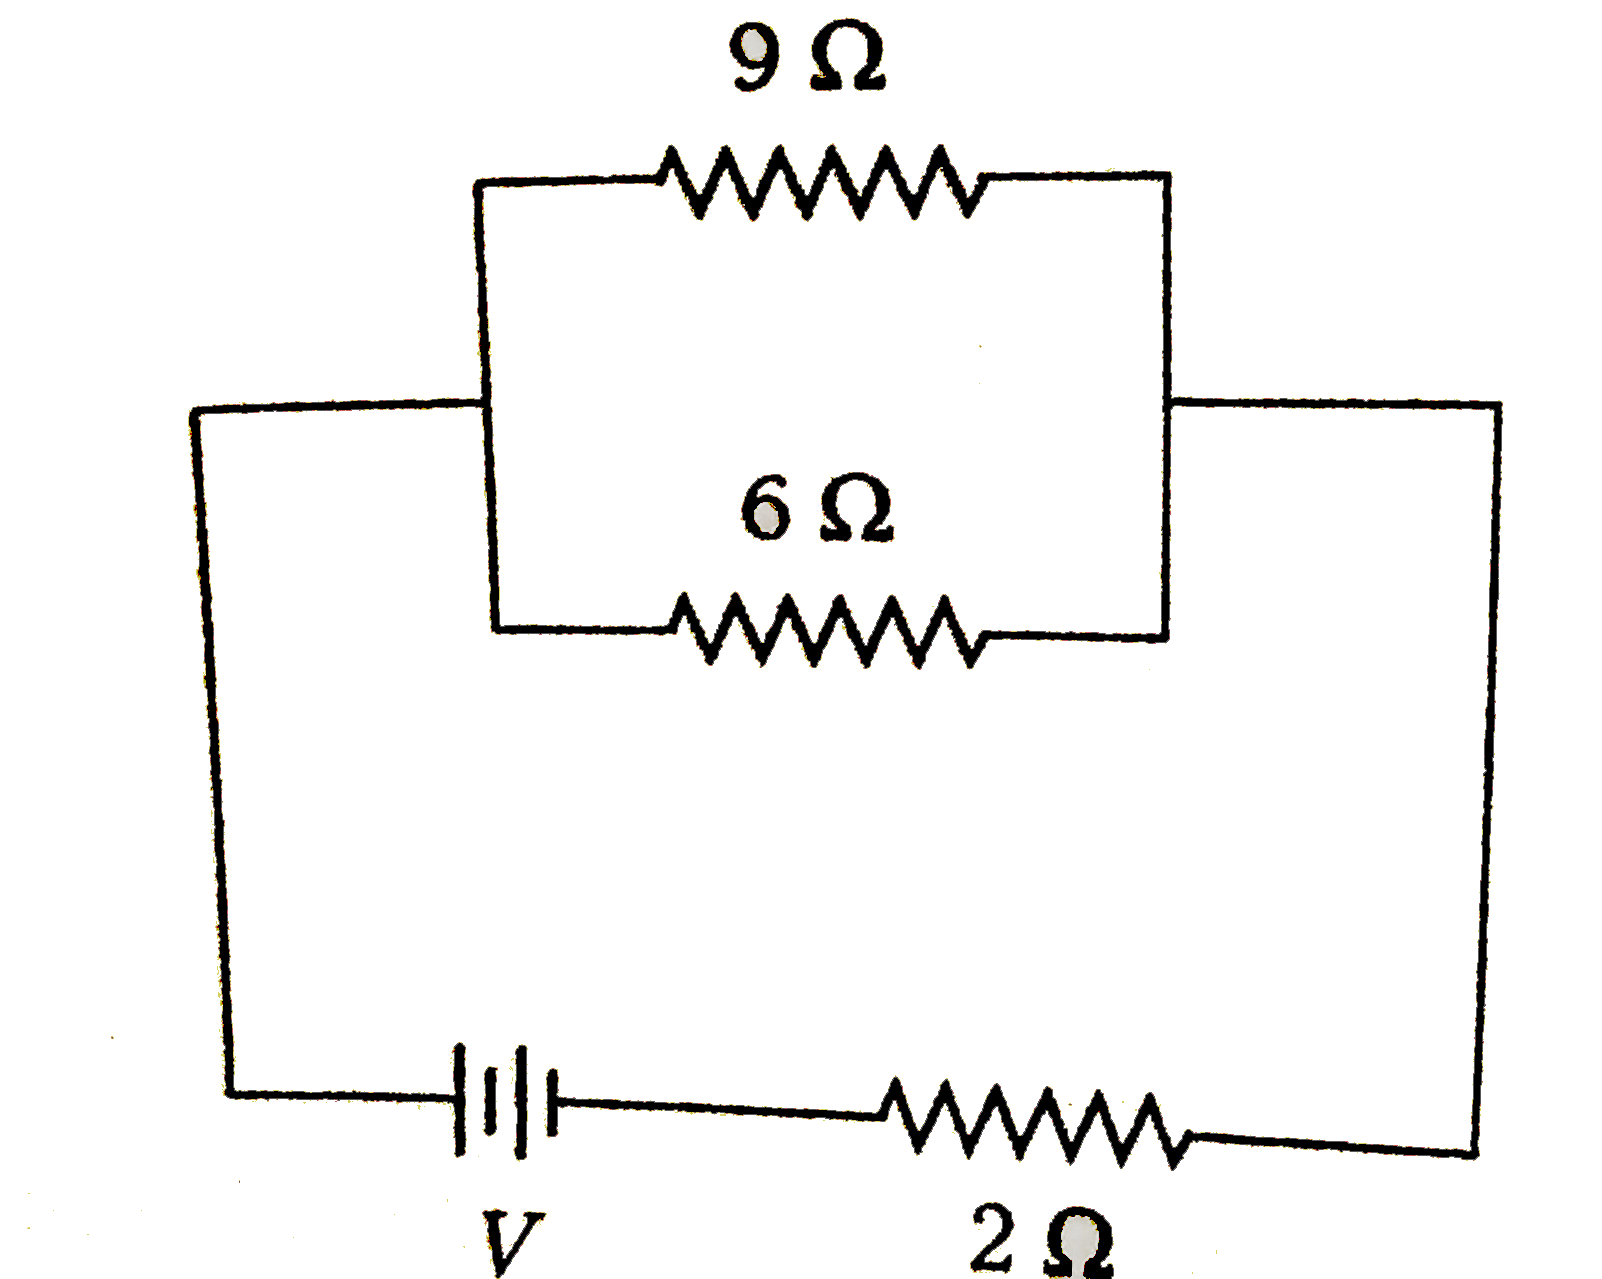 If power dissipated in the 9Omega resistor in the circuit shown is 36 W, the potential difference across the 2Omega resistor is